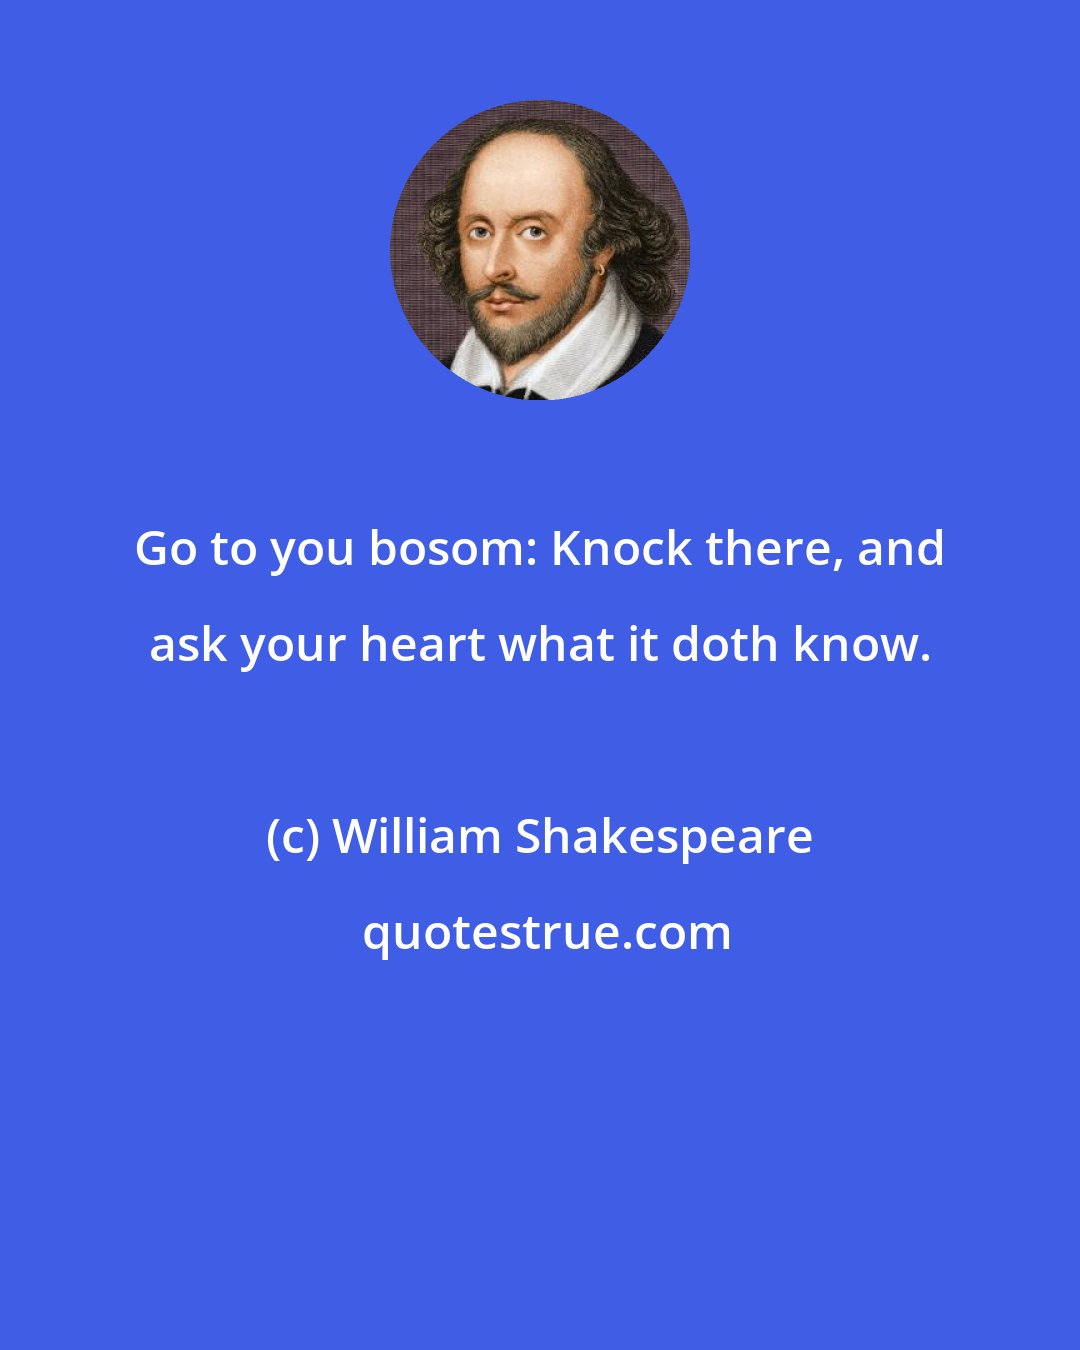 William Shakespeare: Go to you bosom: Knock there, and ask your heart what it doth know.